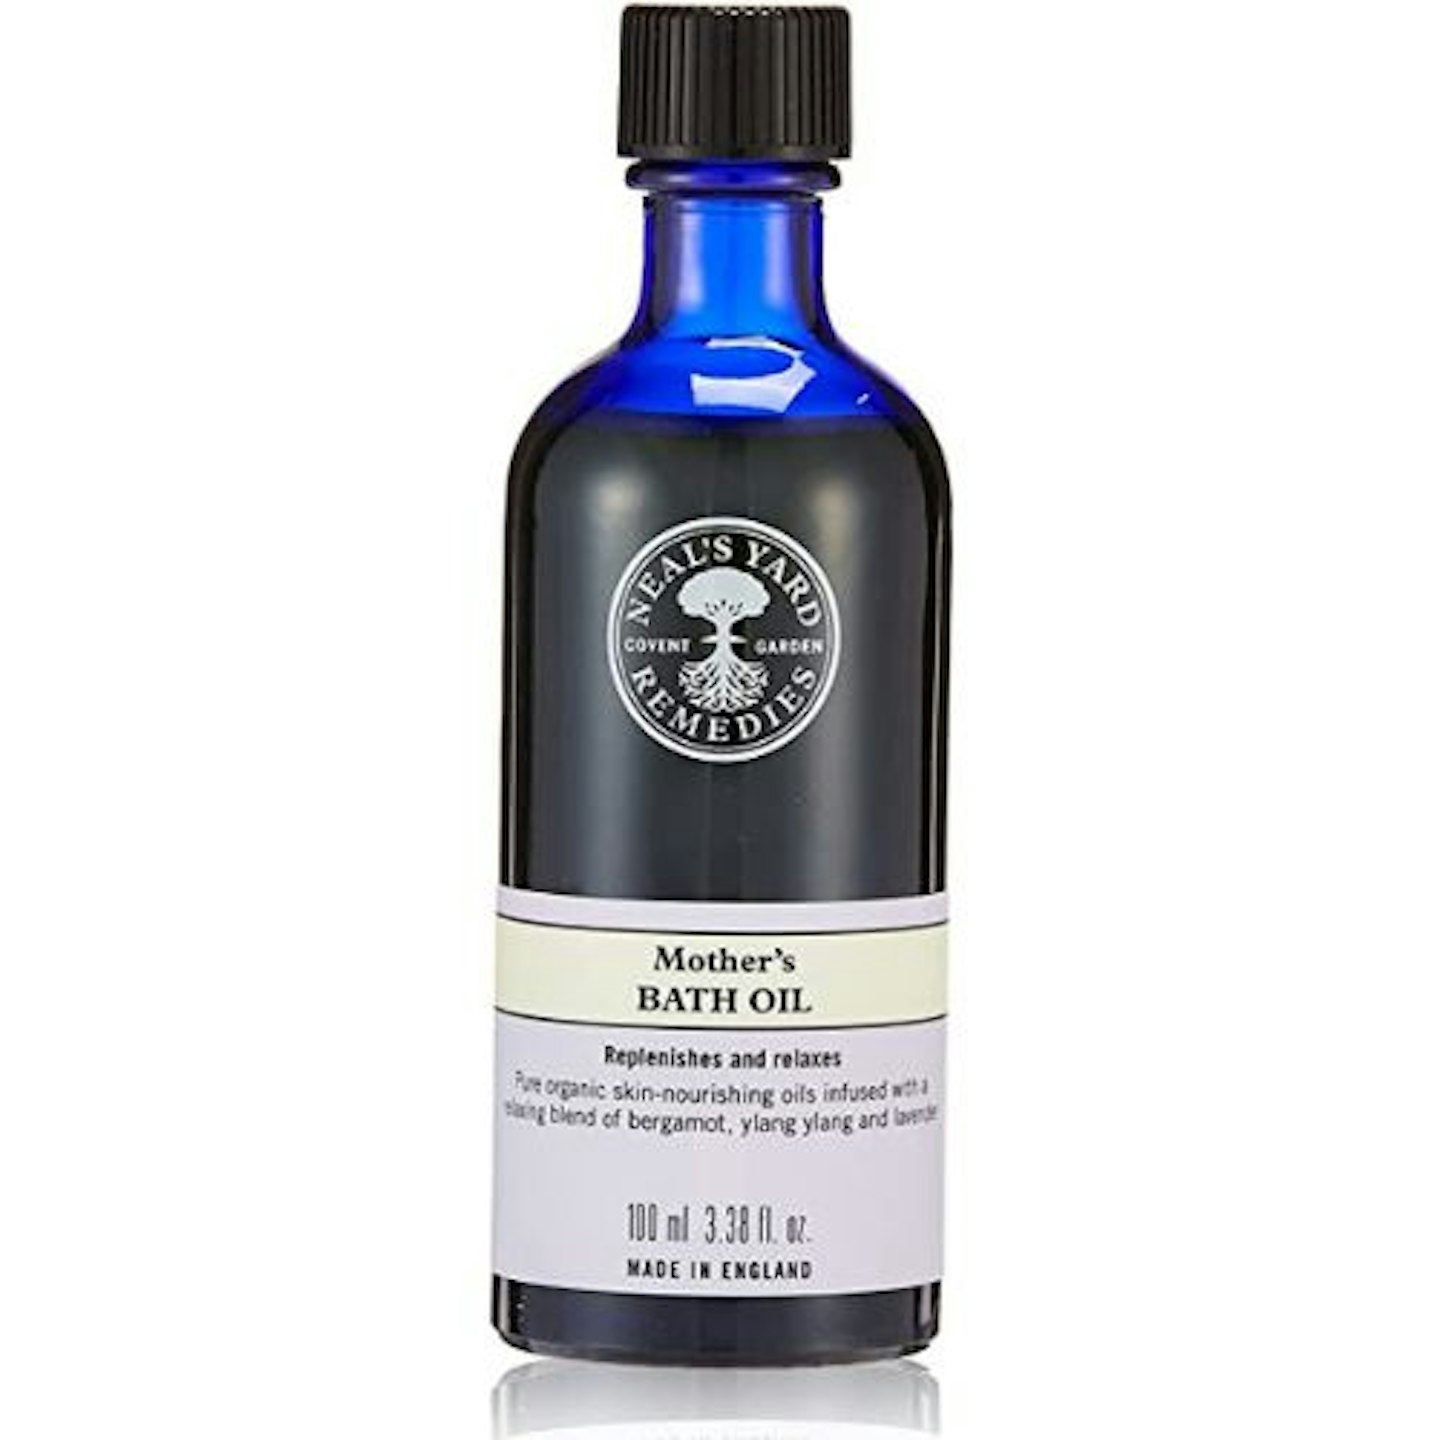 Neal's Yard Remedies Mother's Bath Oil